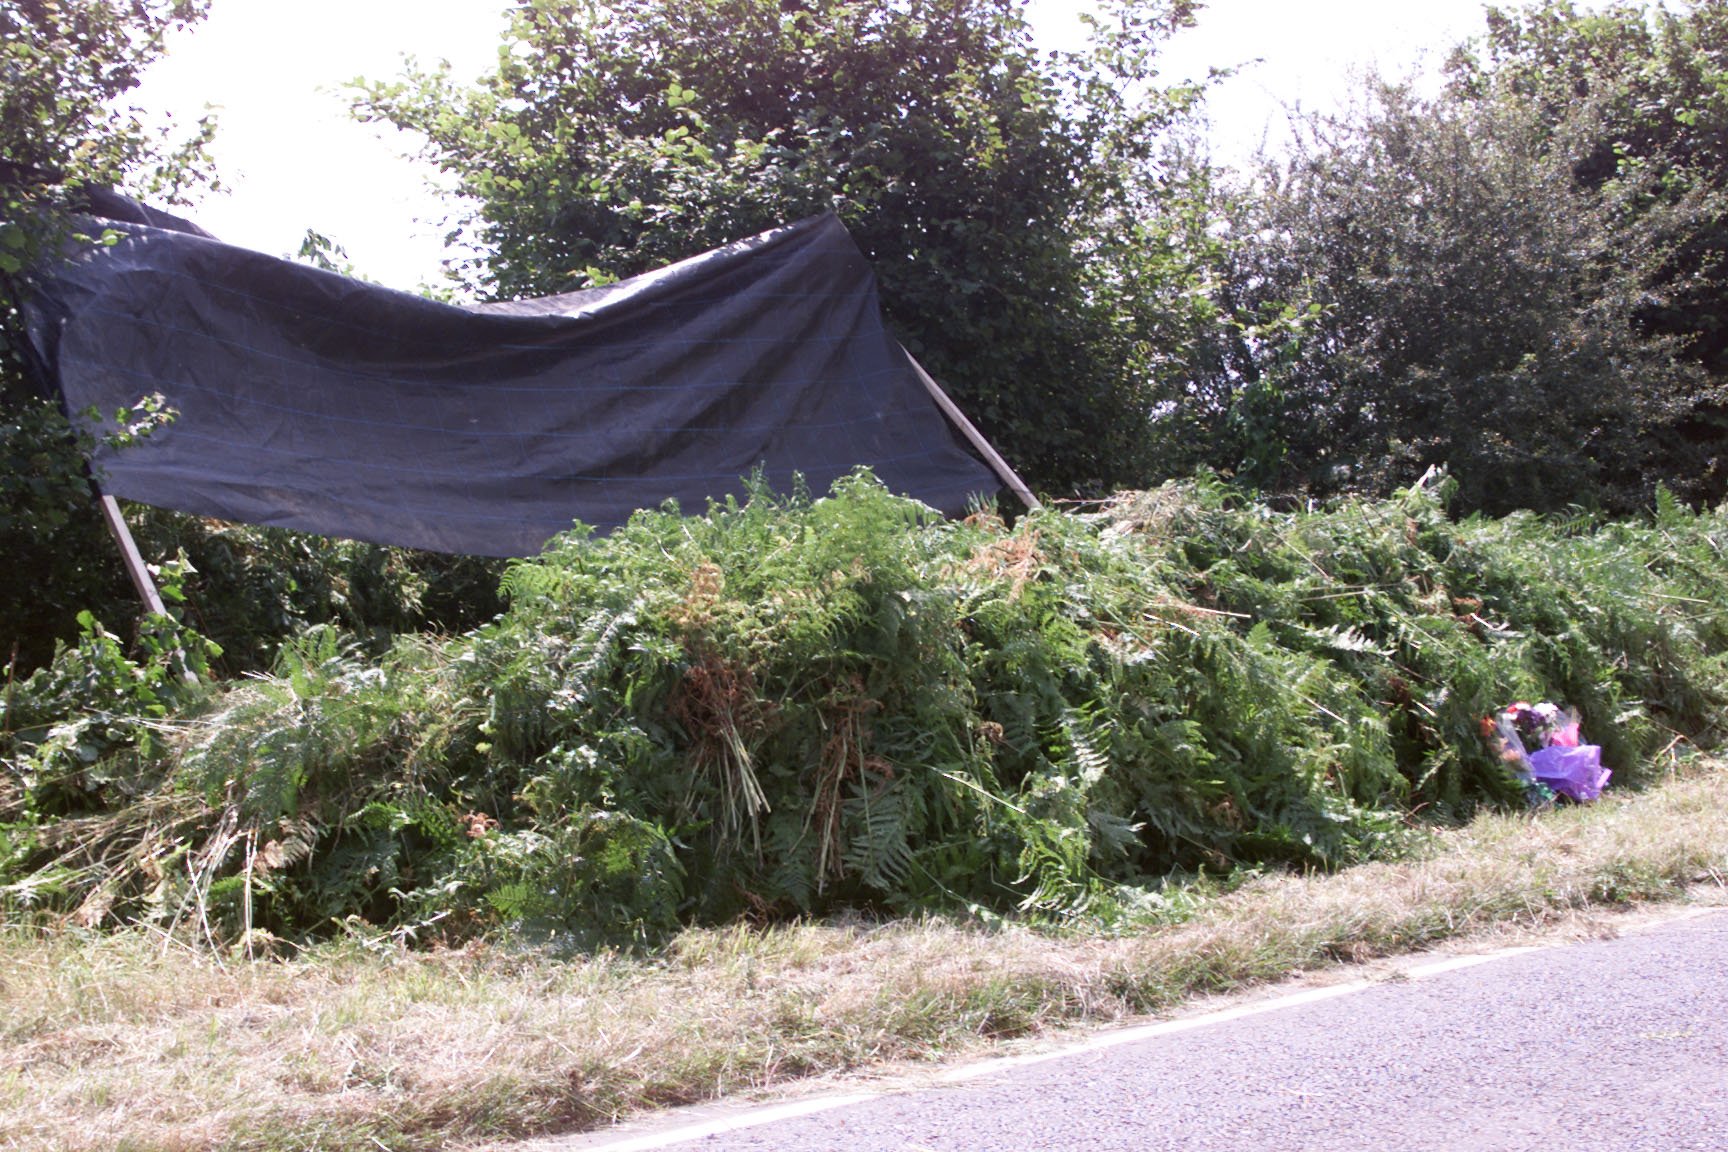 The crime scene where the body of Sarah Payne was found